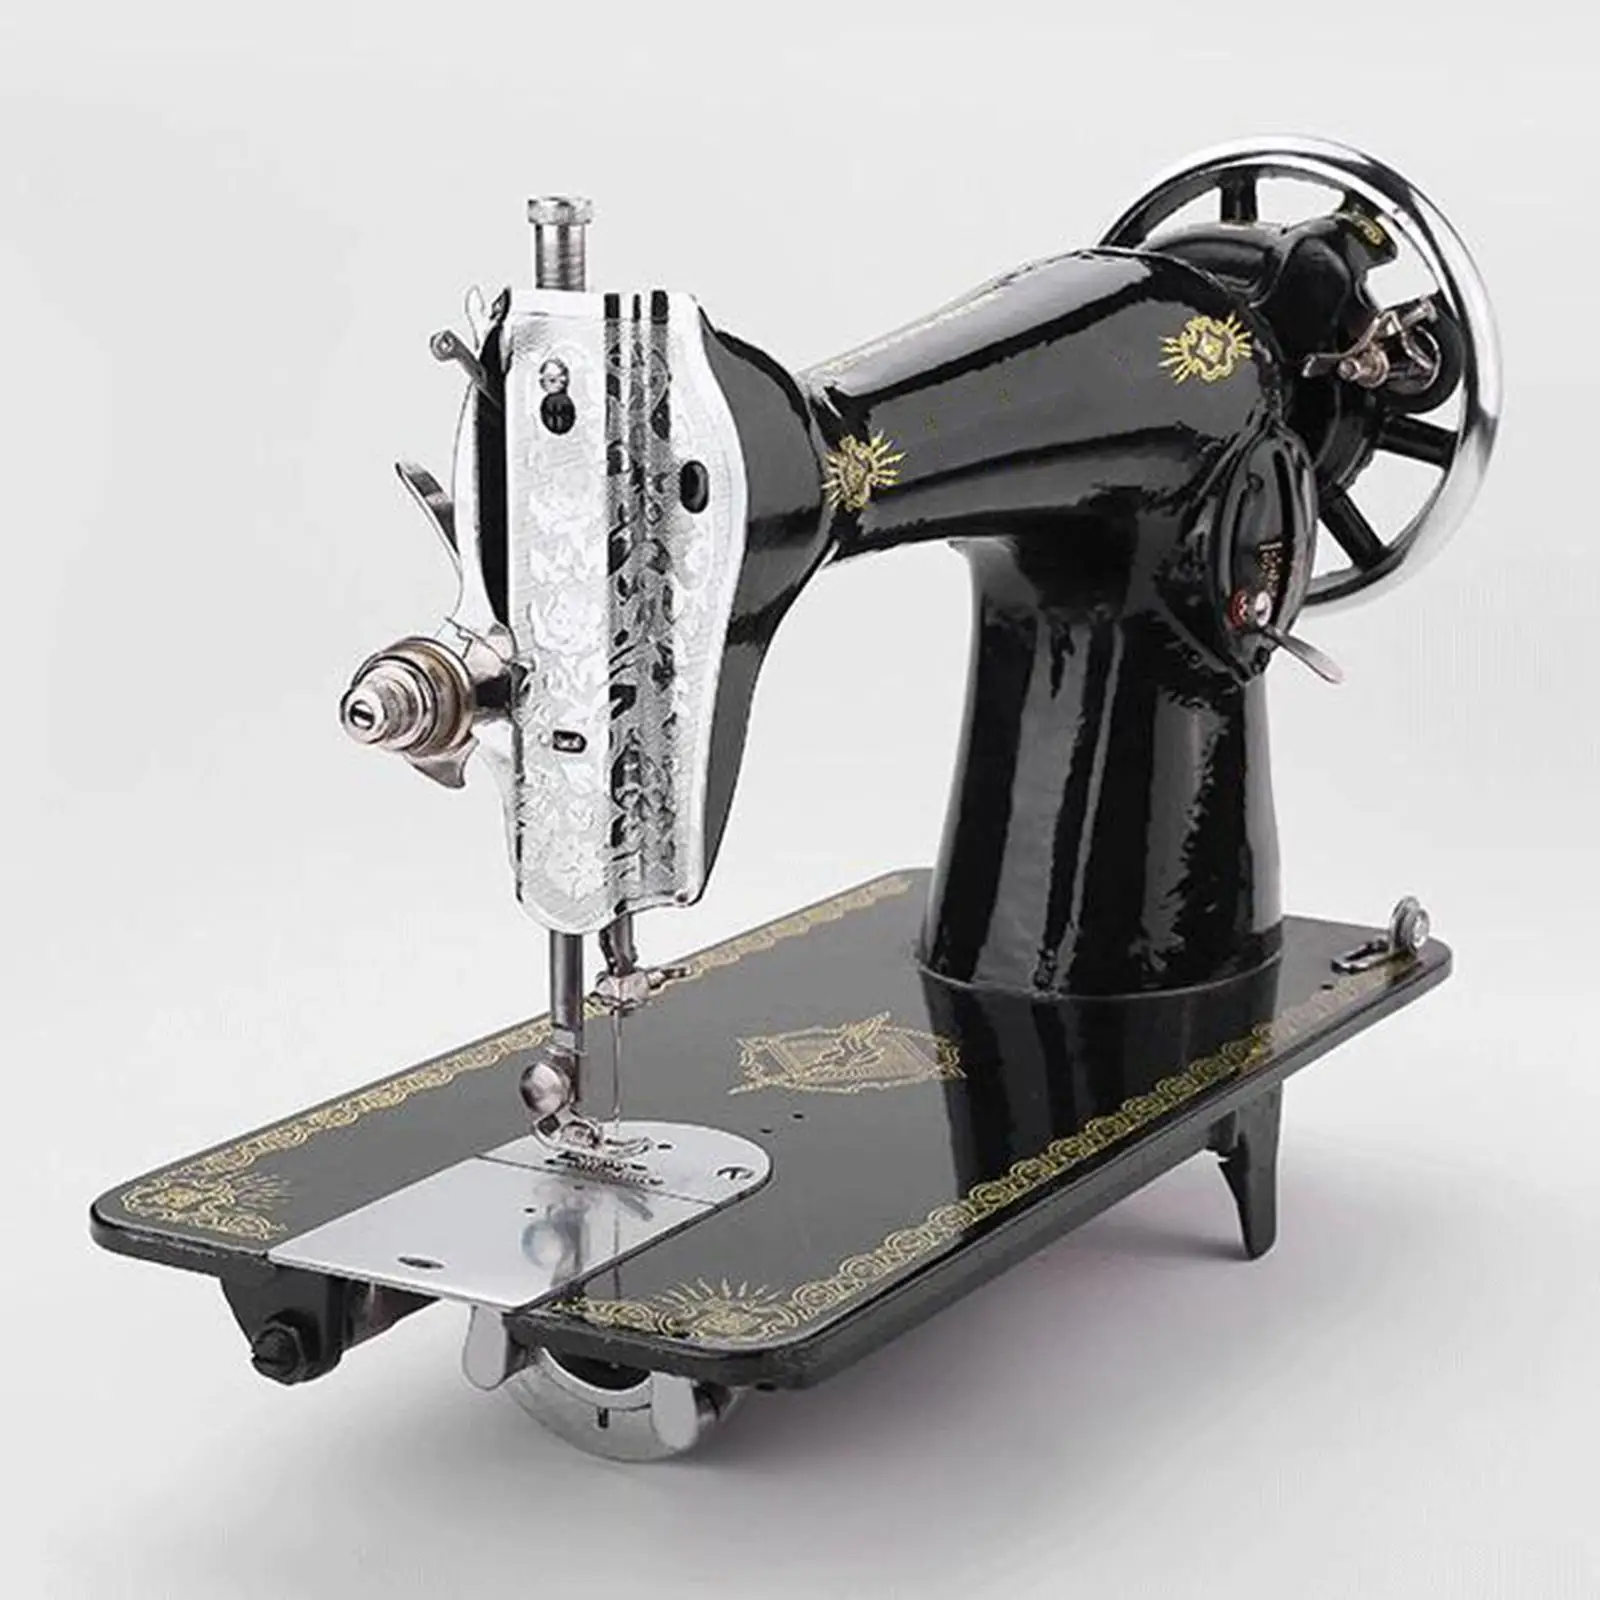 Household Sewing Machine Hand Crank Handcrank Sew Accessories for Old Sewing Machines